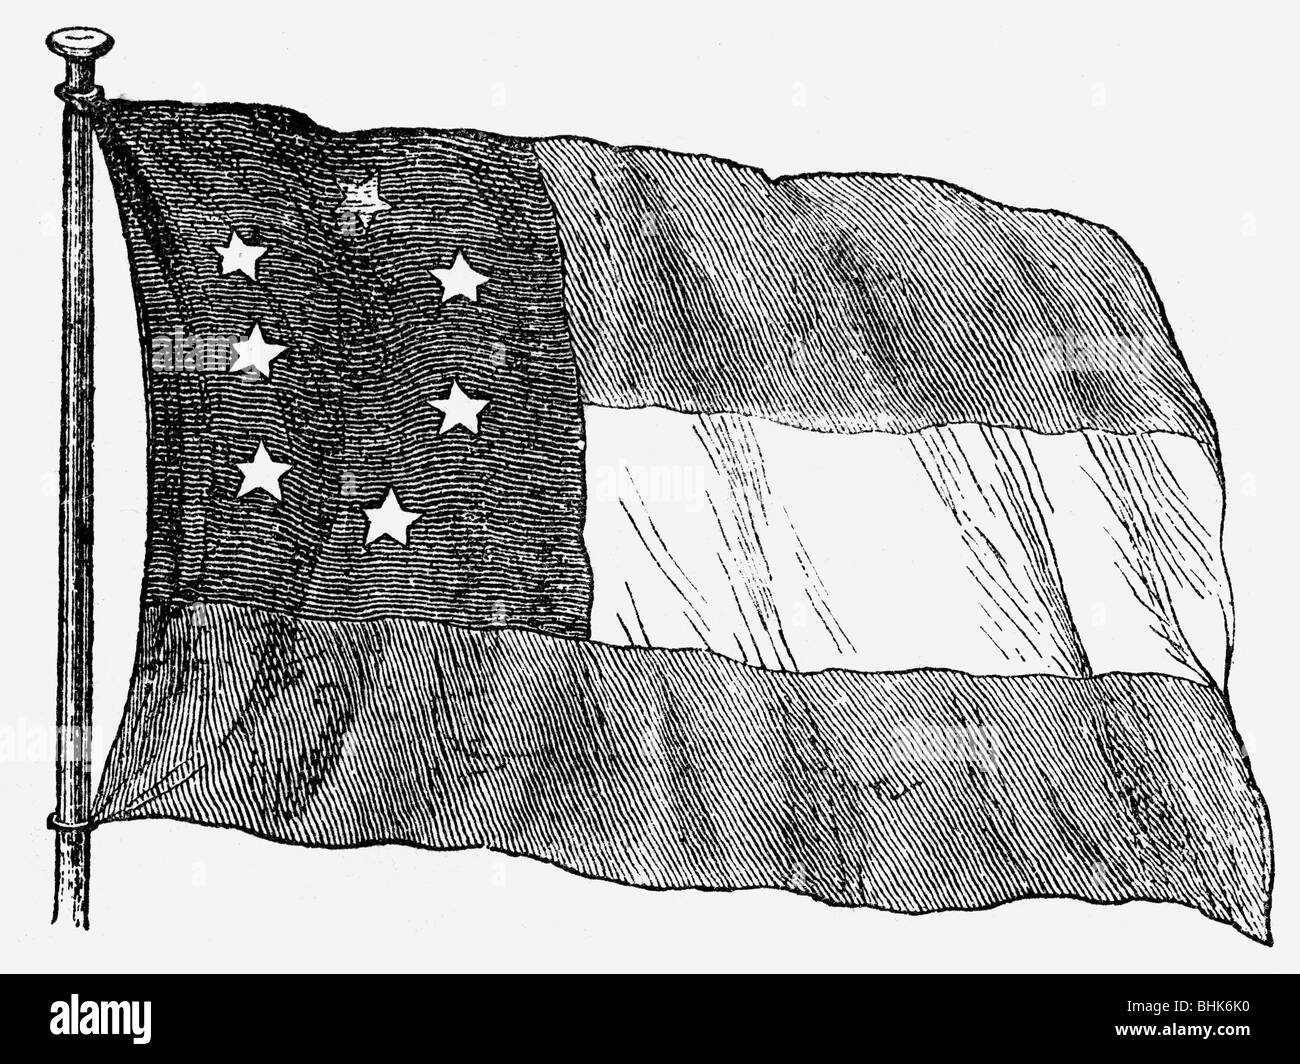 heraldy, flags, Confederate States of America, 1st national flag with seven stars, 5.3.- 21.5.1861, designed by Nicola Marschall, wood engraving, 19th century, , Stock Photo